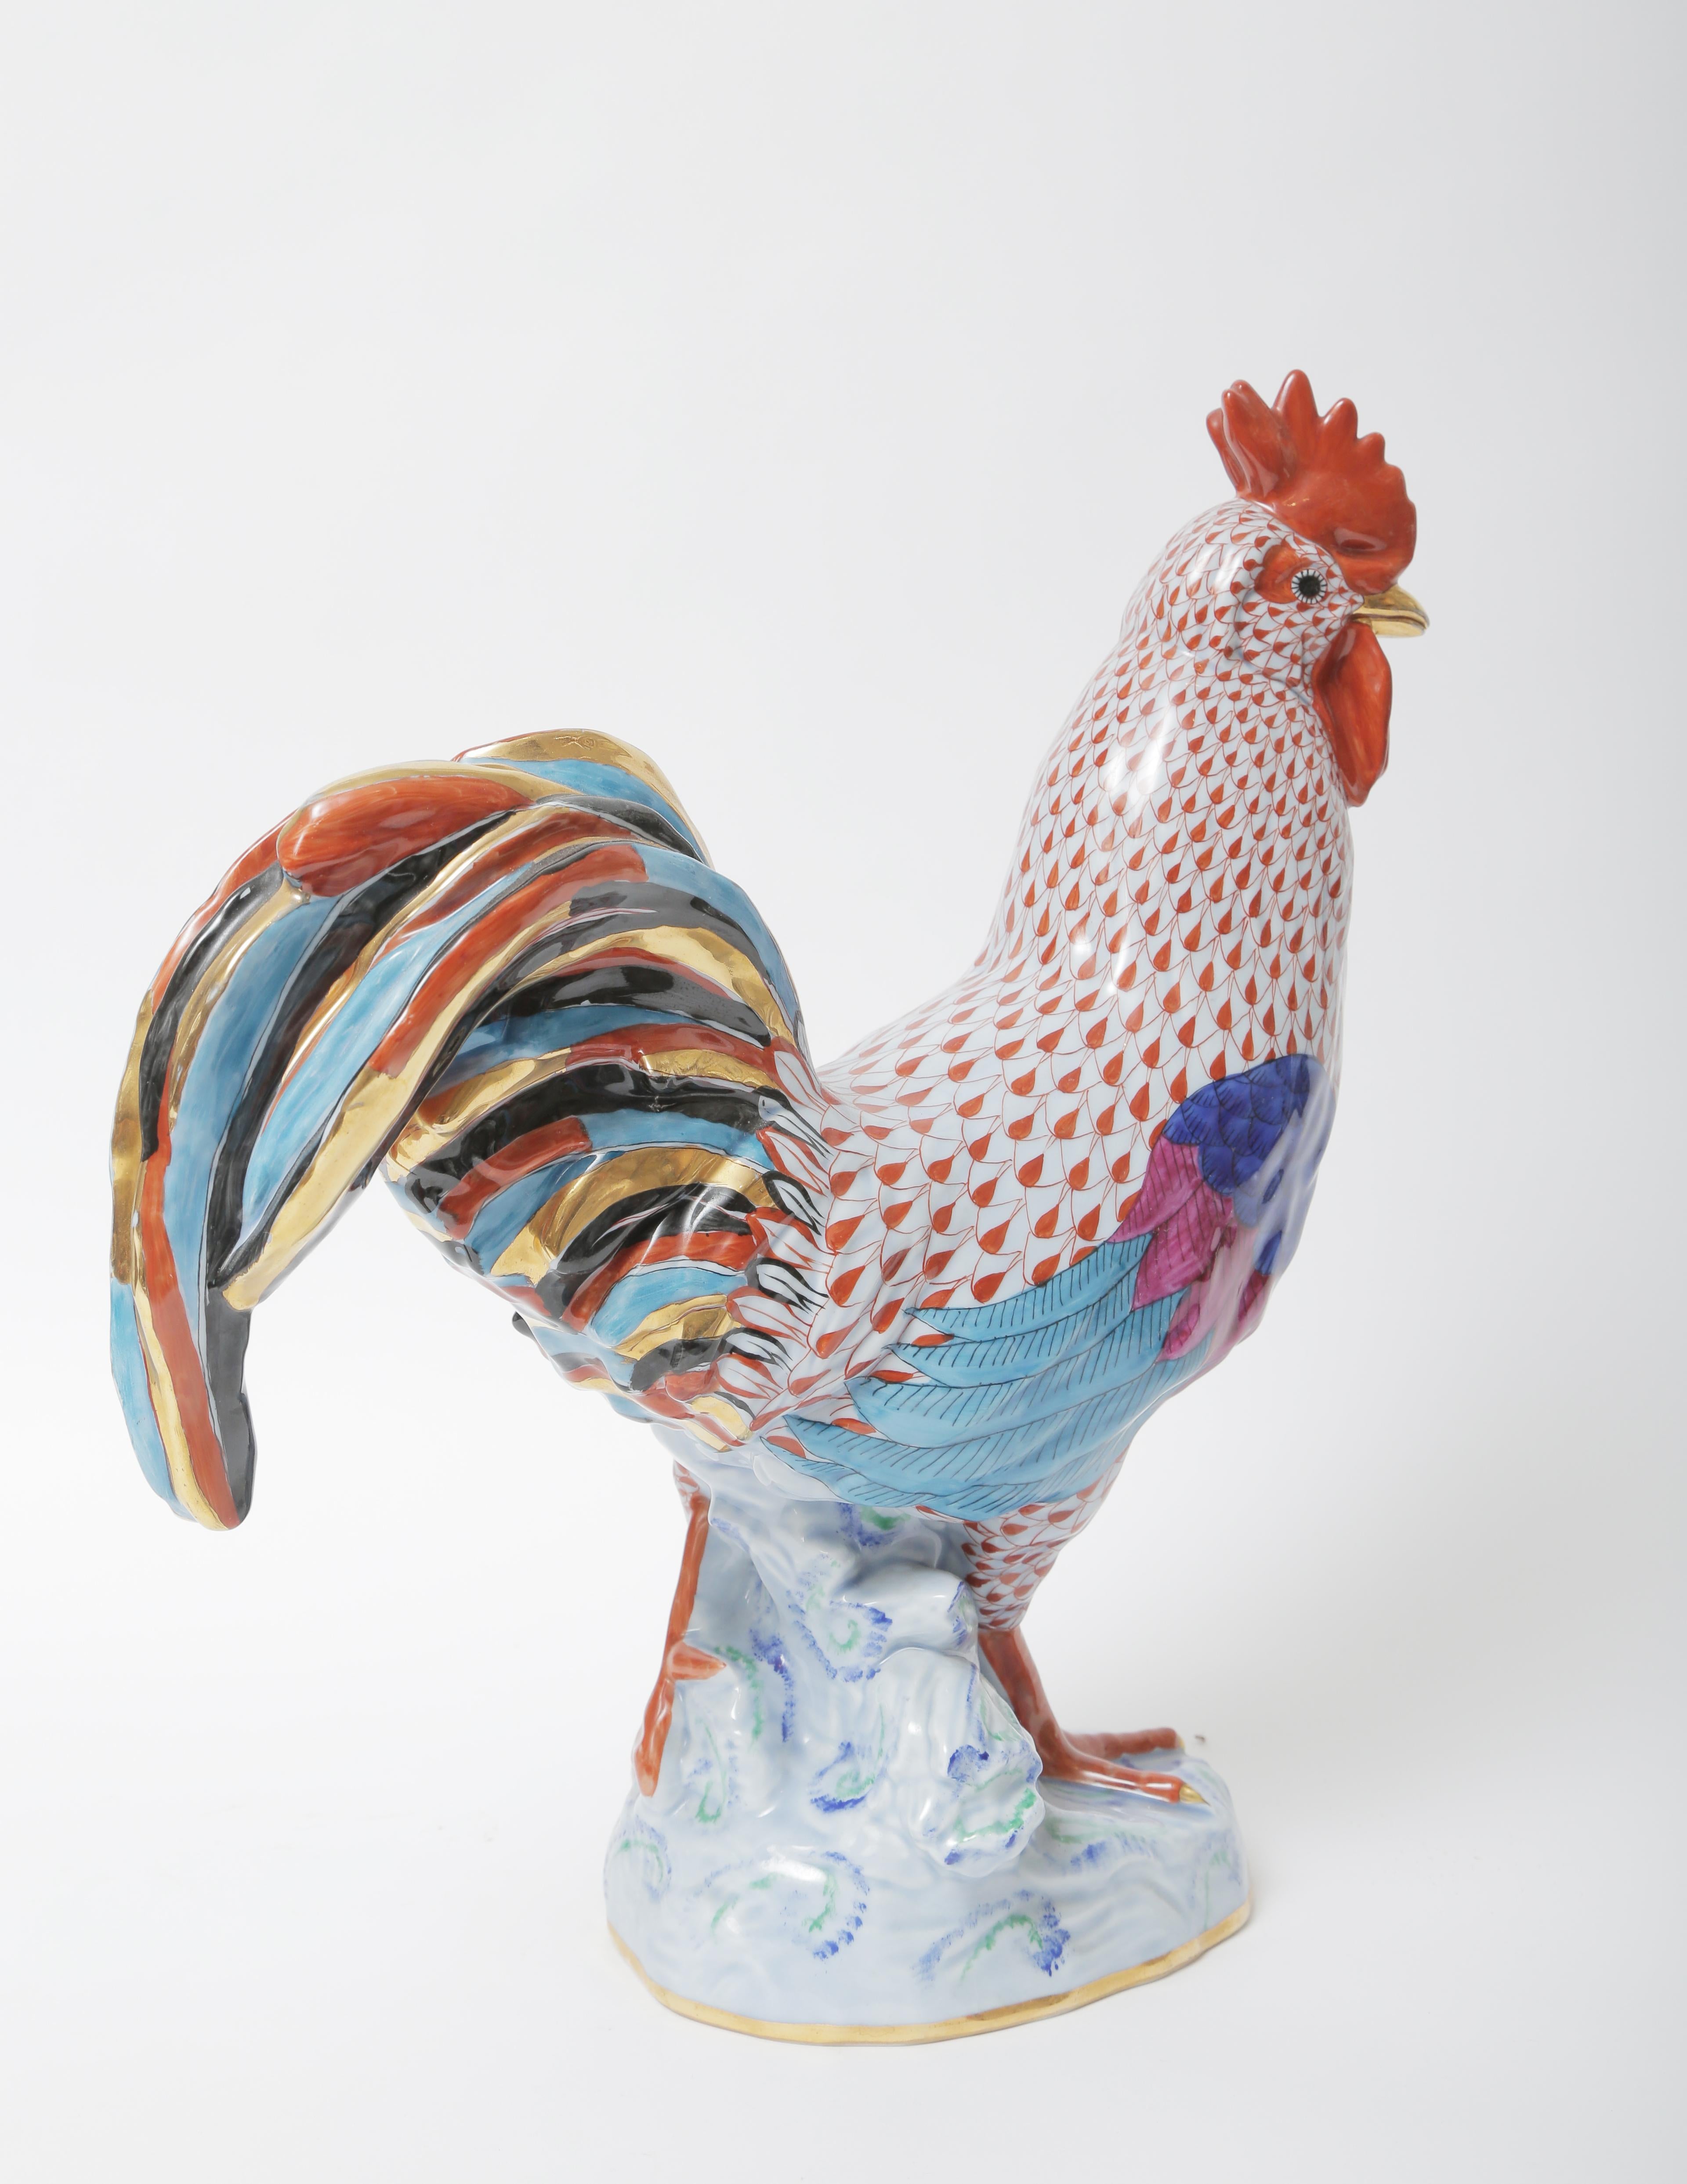 Late 20th Century Rare Largest Sized Herend Rooster Figurine. Cobalt Porcelain Hand Painted